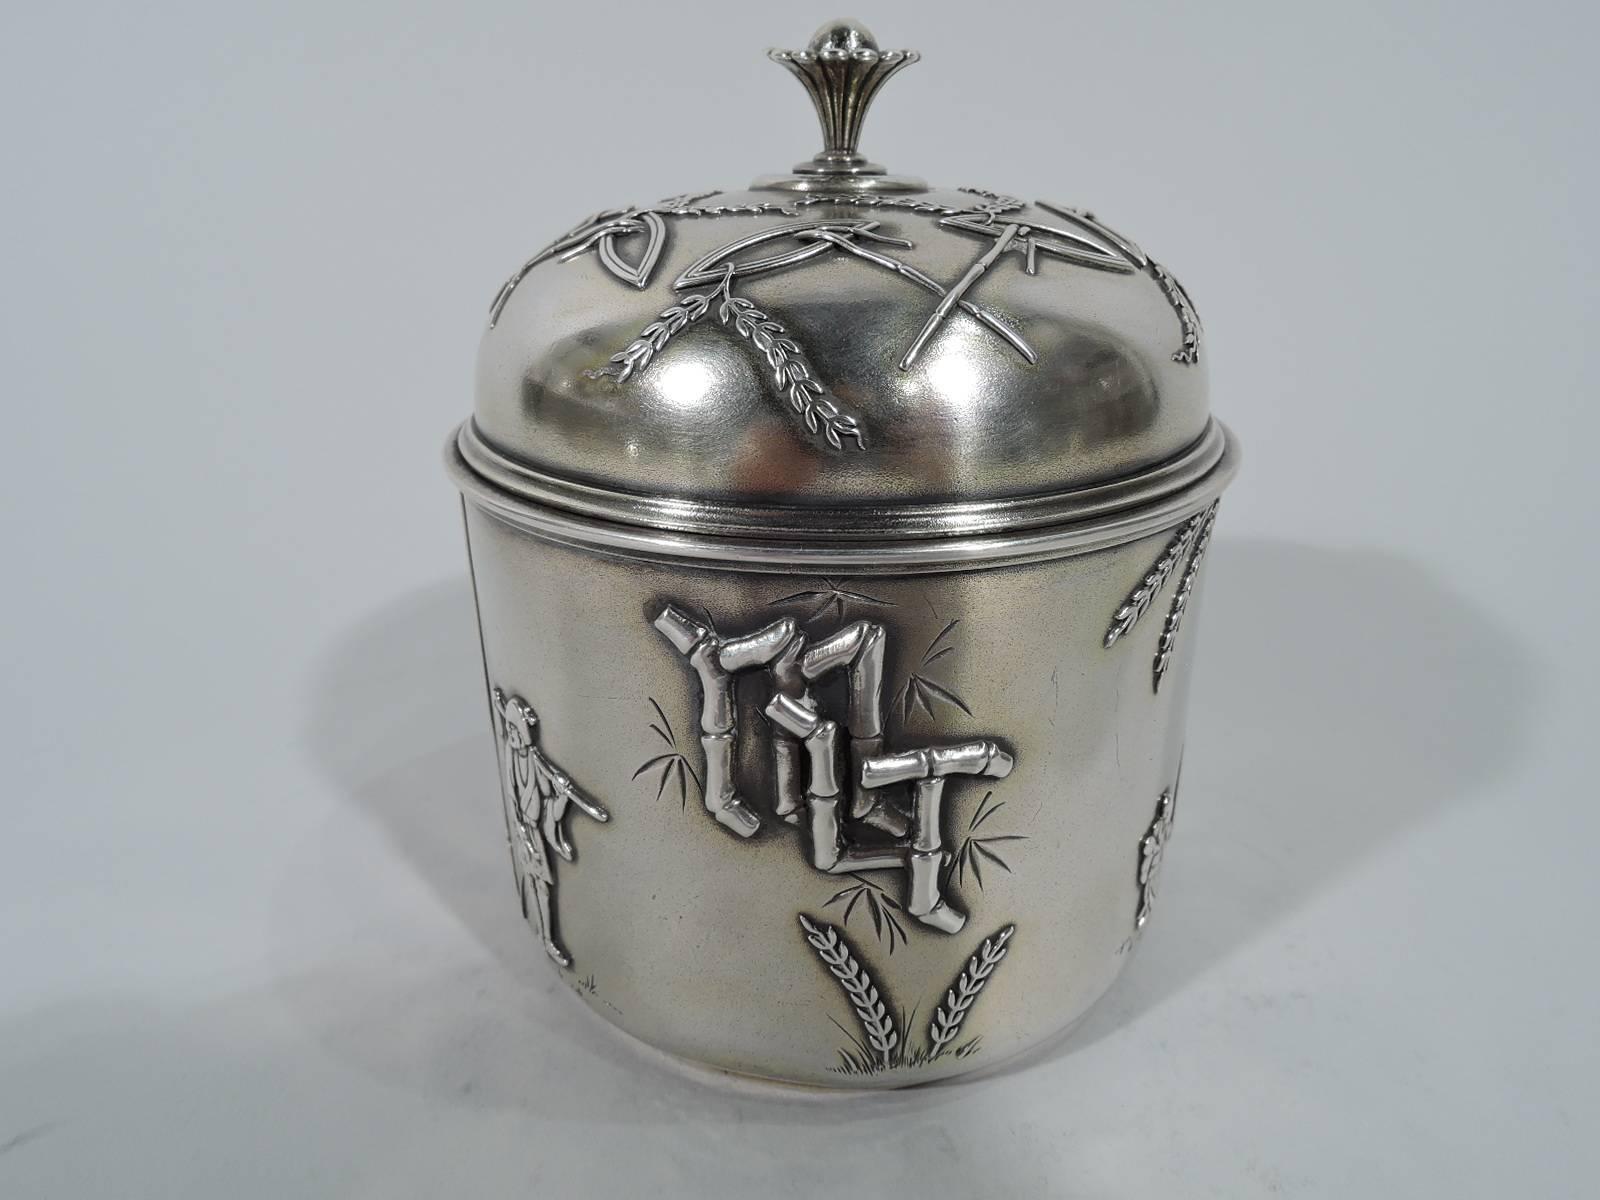 Japonesque sterling silver tea caddy. Made by Tiffany & Co. in New York. Drum form with domed cover and lotus finial. Ornament applied to butler-finished ground: Modishly exotic figures, including a parasol-carrying geisha, barelegged farmer, and